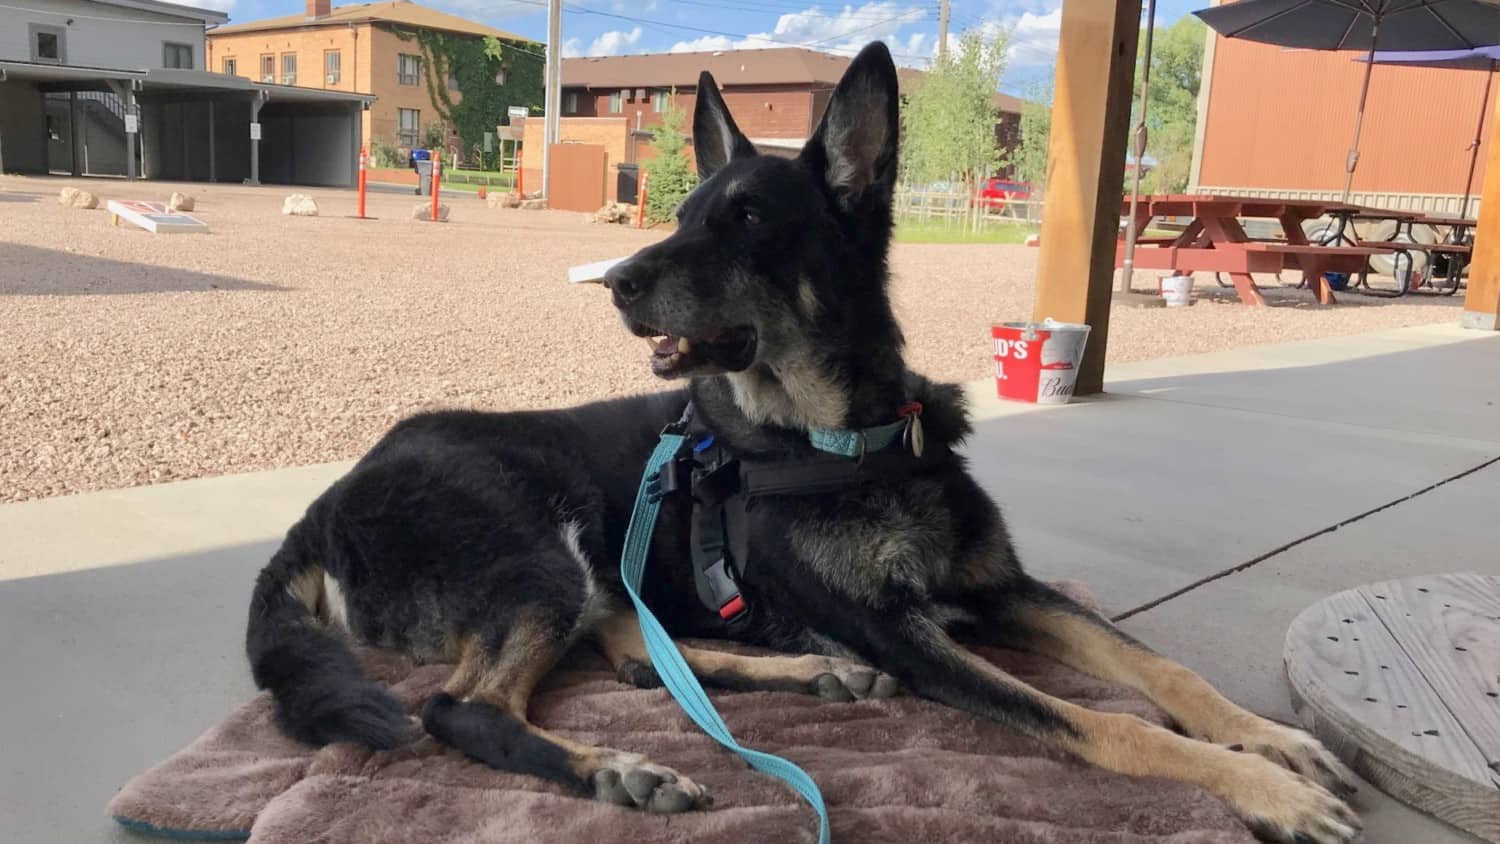 A German Shepherd dog at pet friendly Custer Beacon in the Black Hills